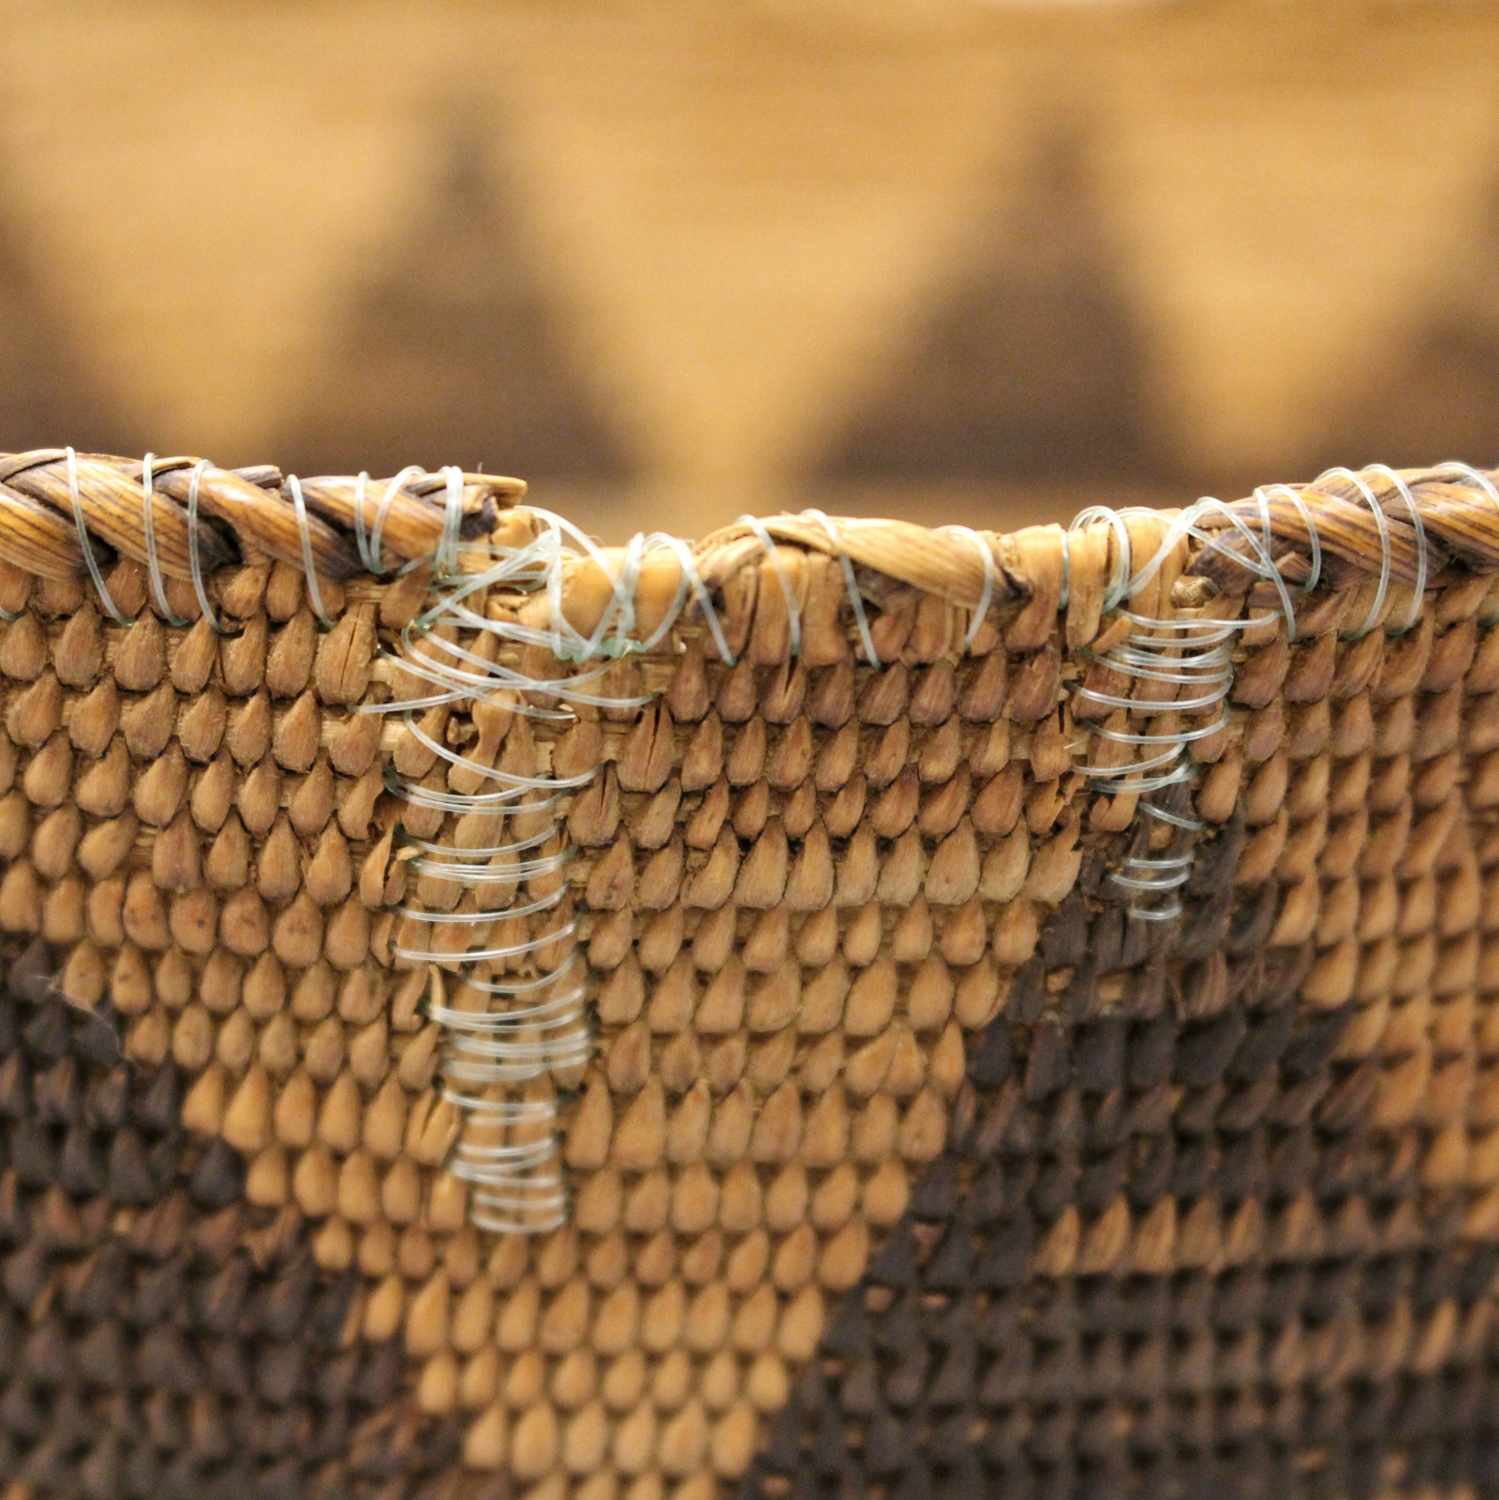 Repaired tan and brown Basket with new stitching at the top.